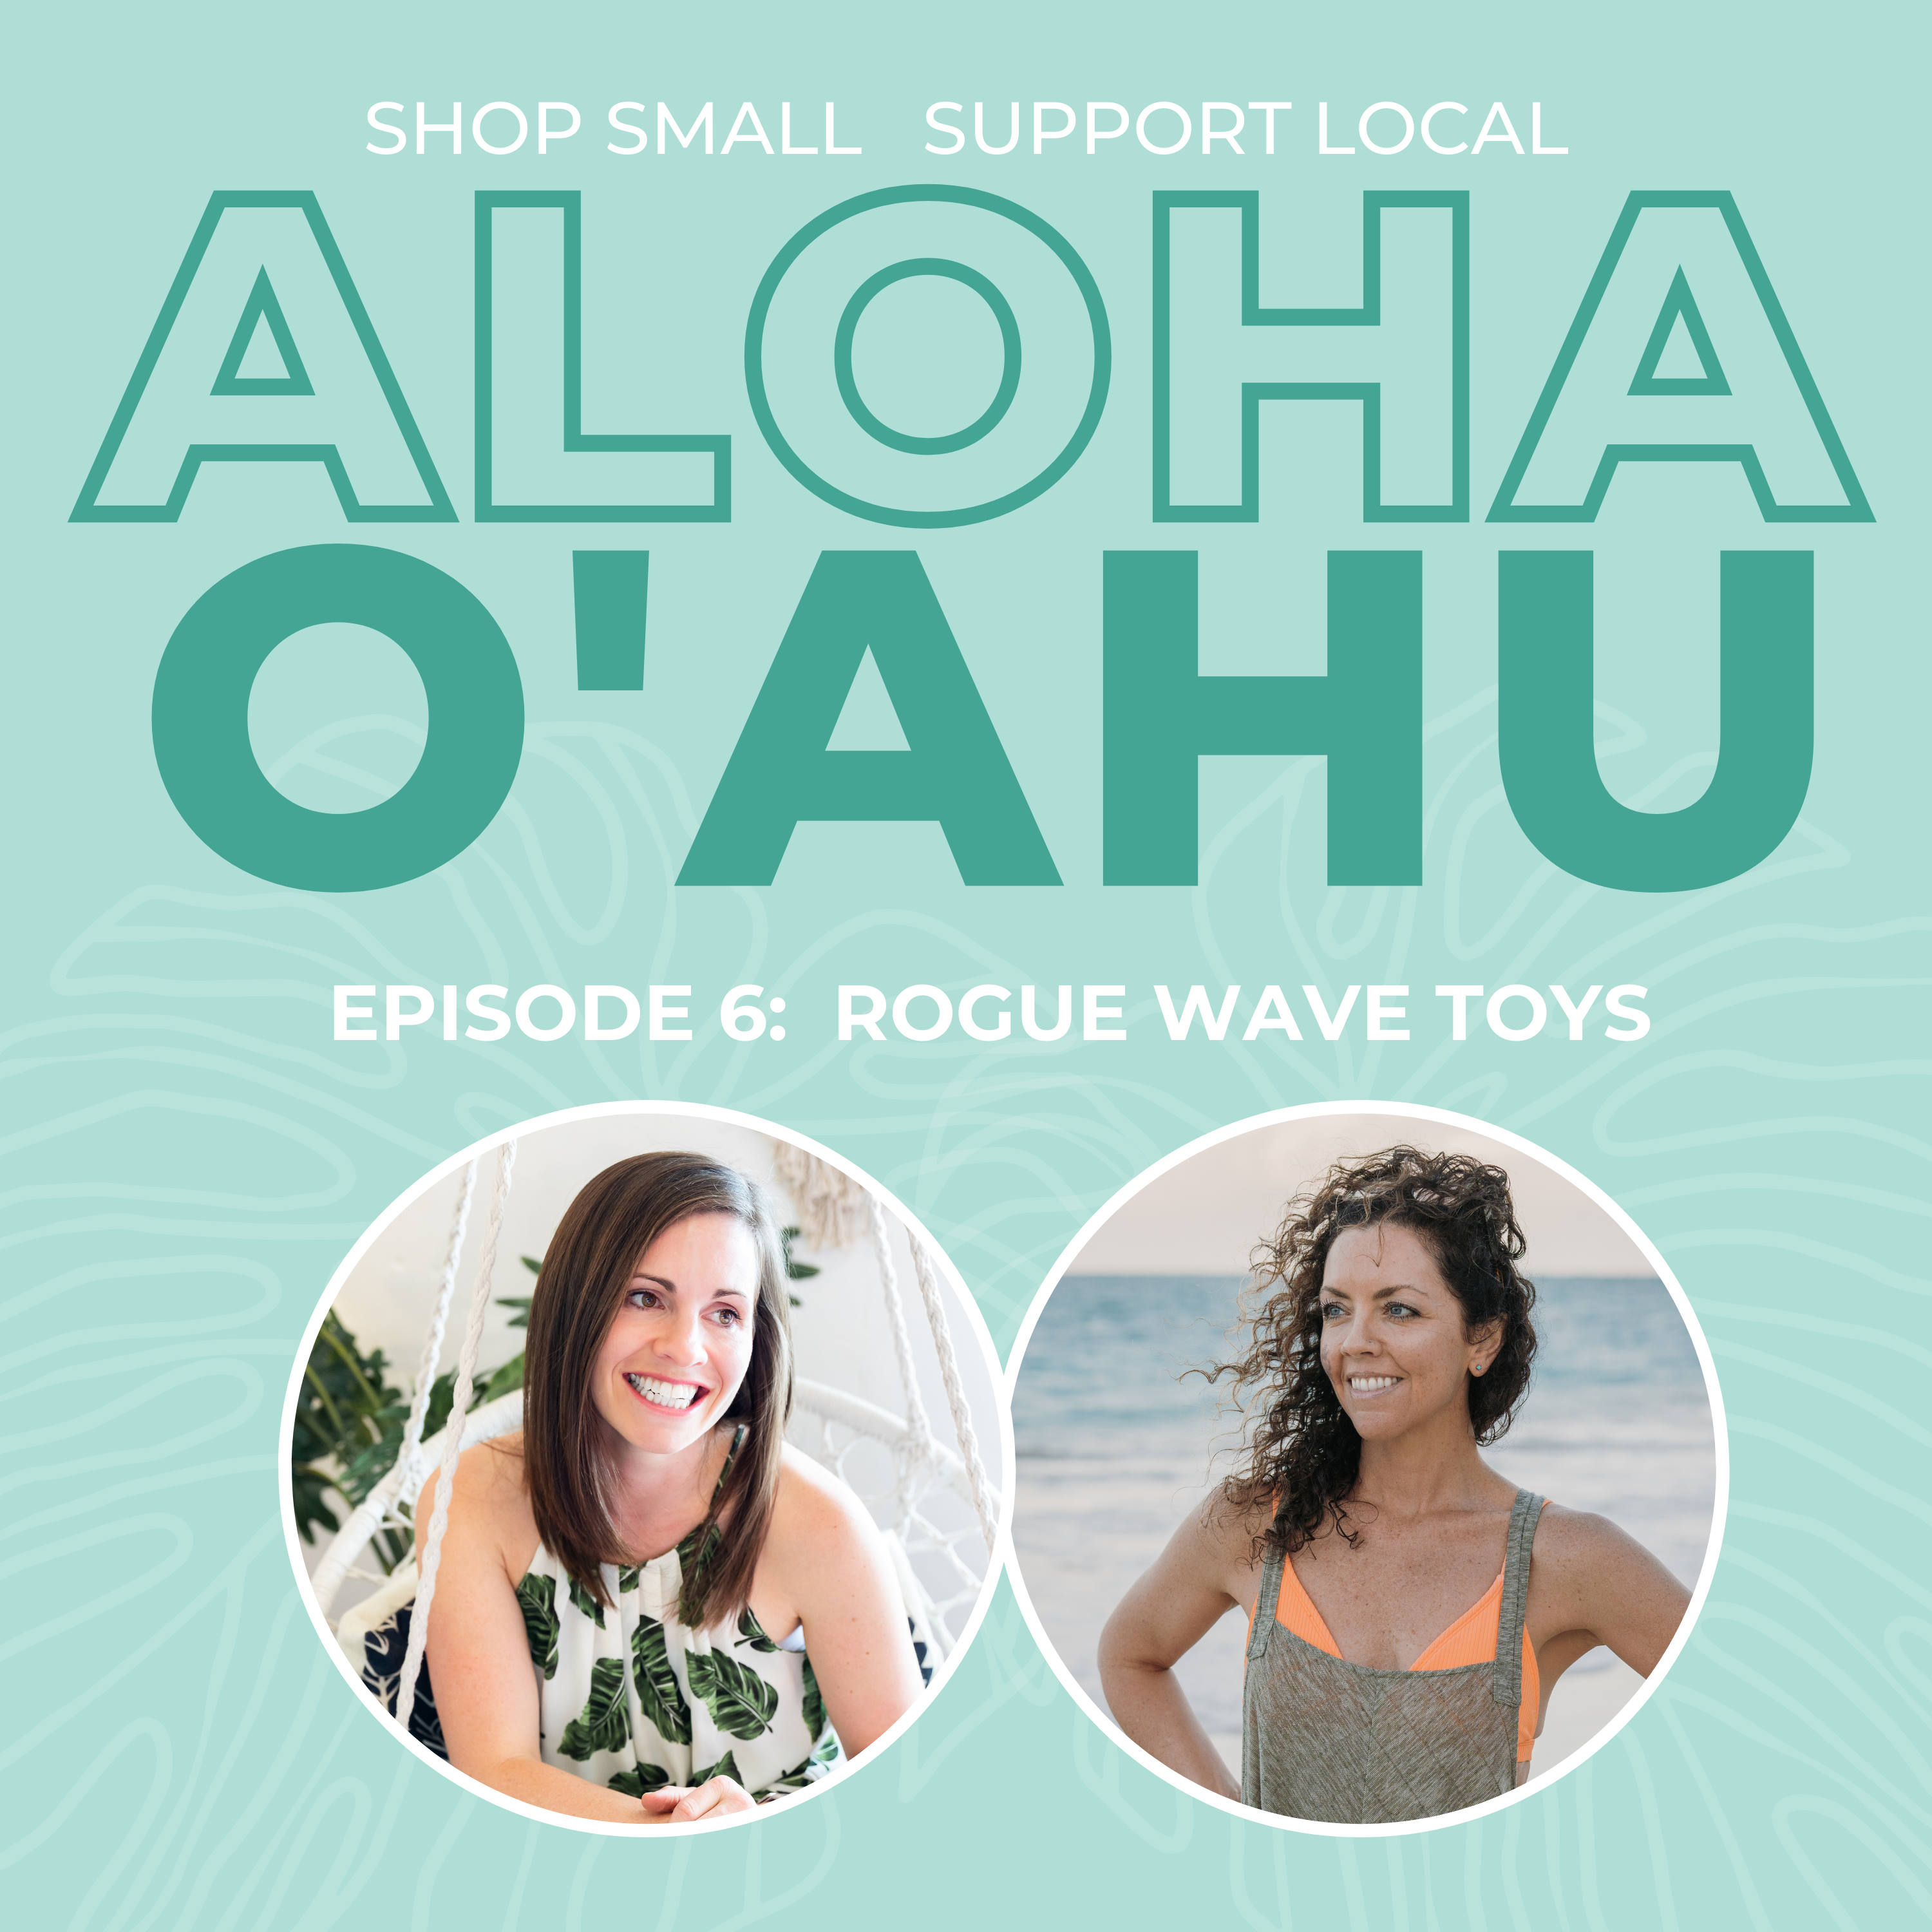 Rogue wave toys oahu podcast episode 6